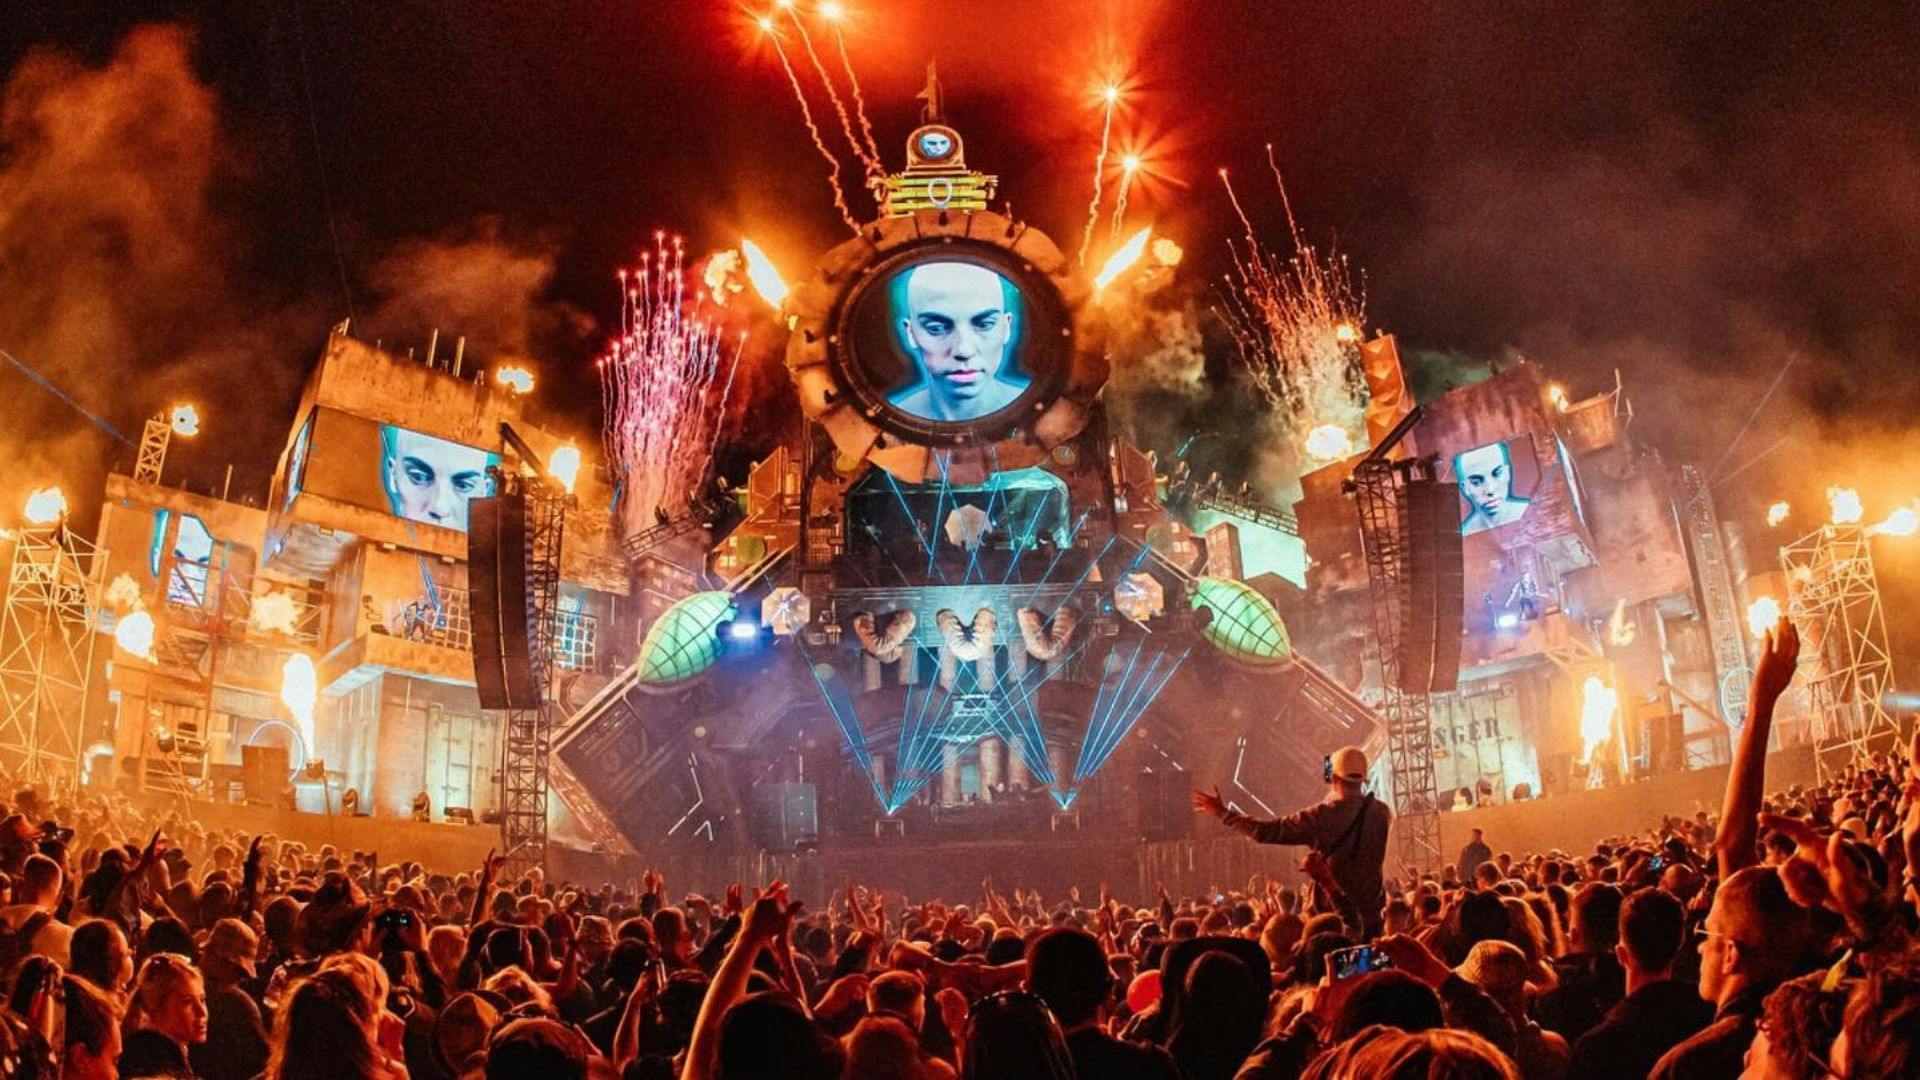 Live Nation Acquires a Stake in UK Festival Boomtown Fair